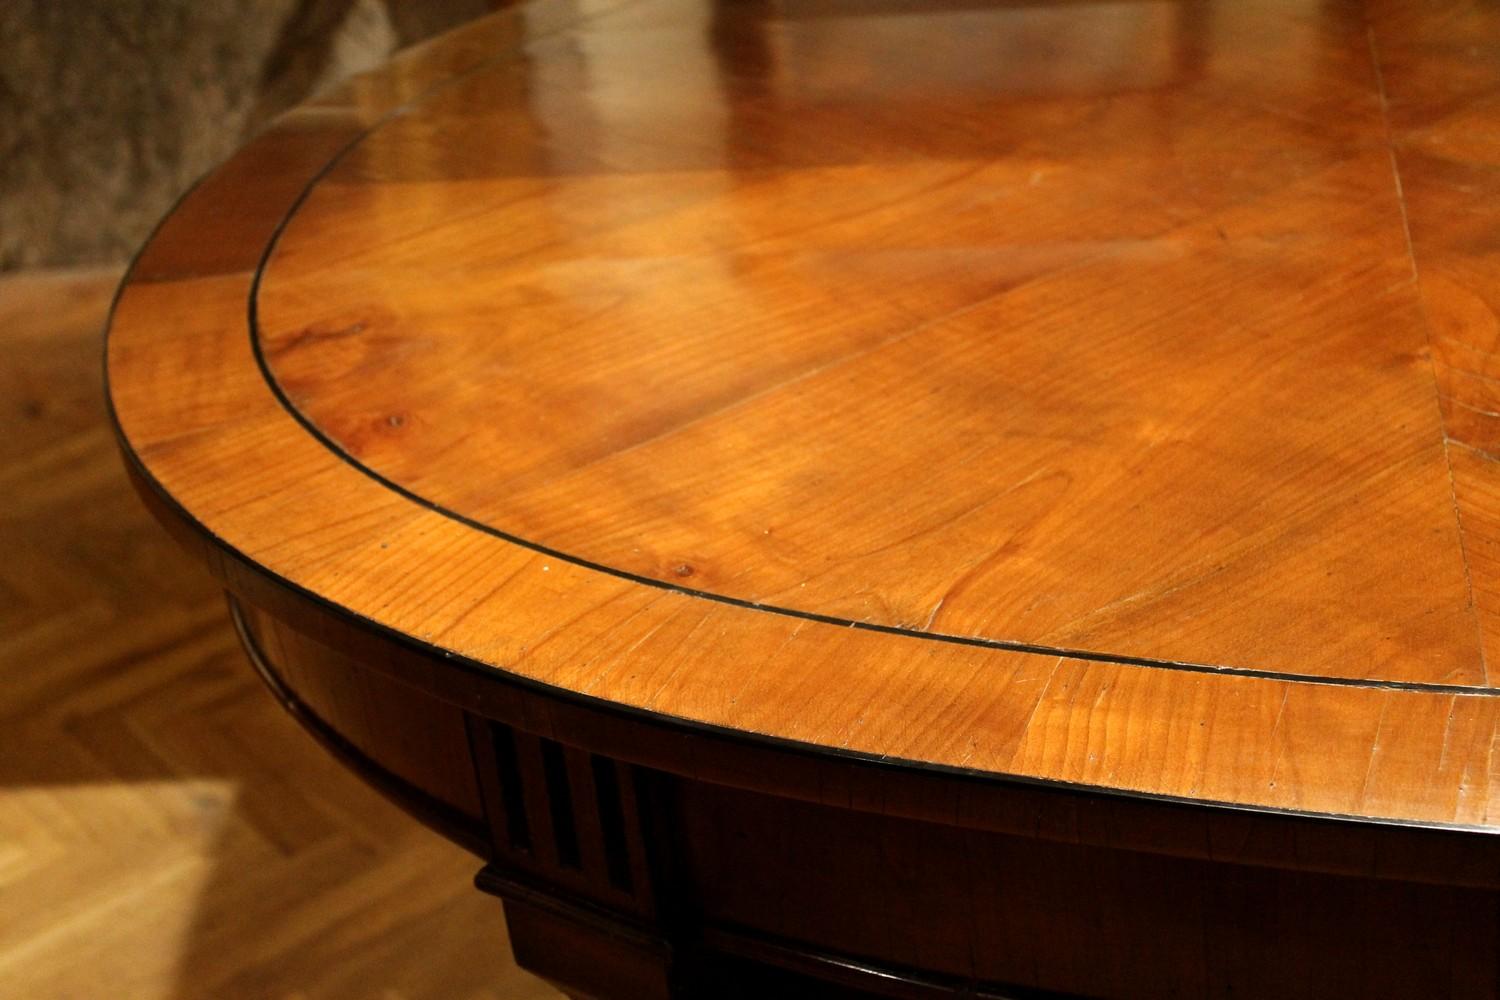 Italian Empire Style 19th Century Oval Cherrywood and Ebony Dining Room Table For Sale 7